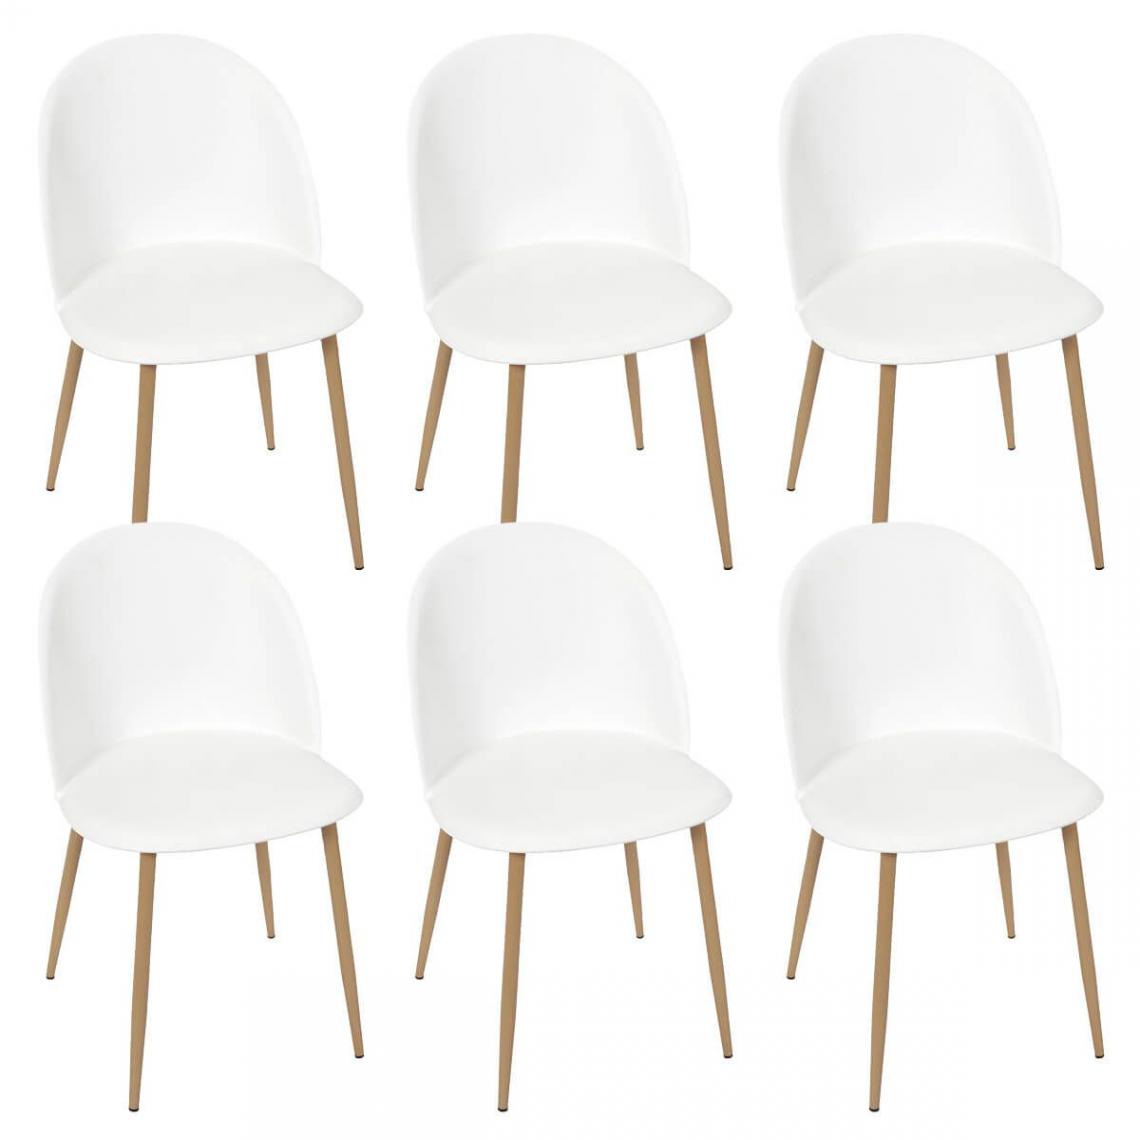 Altobuy - MADDY - Lot de 6 Chaises Scandinaves Blanches - Chaises